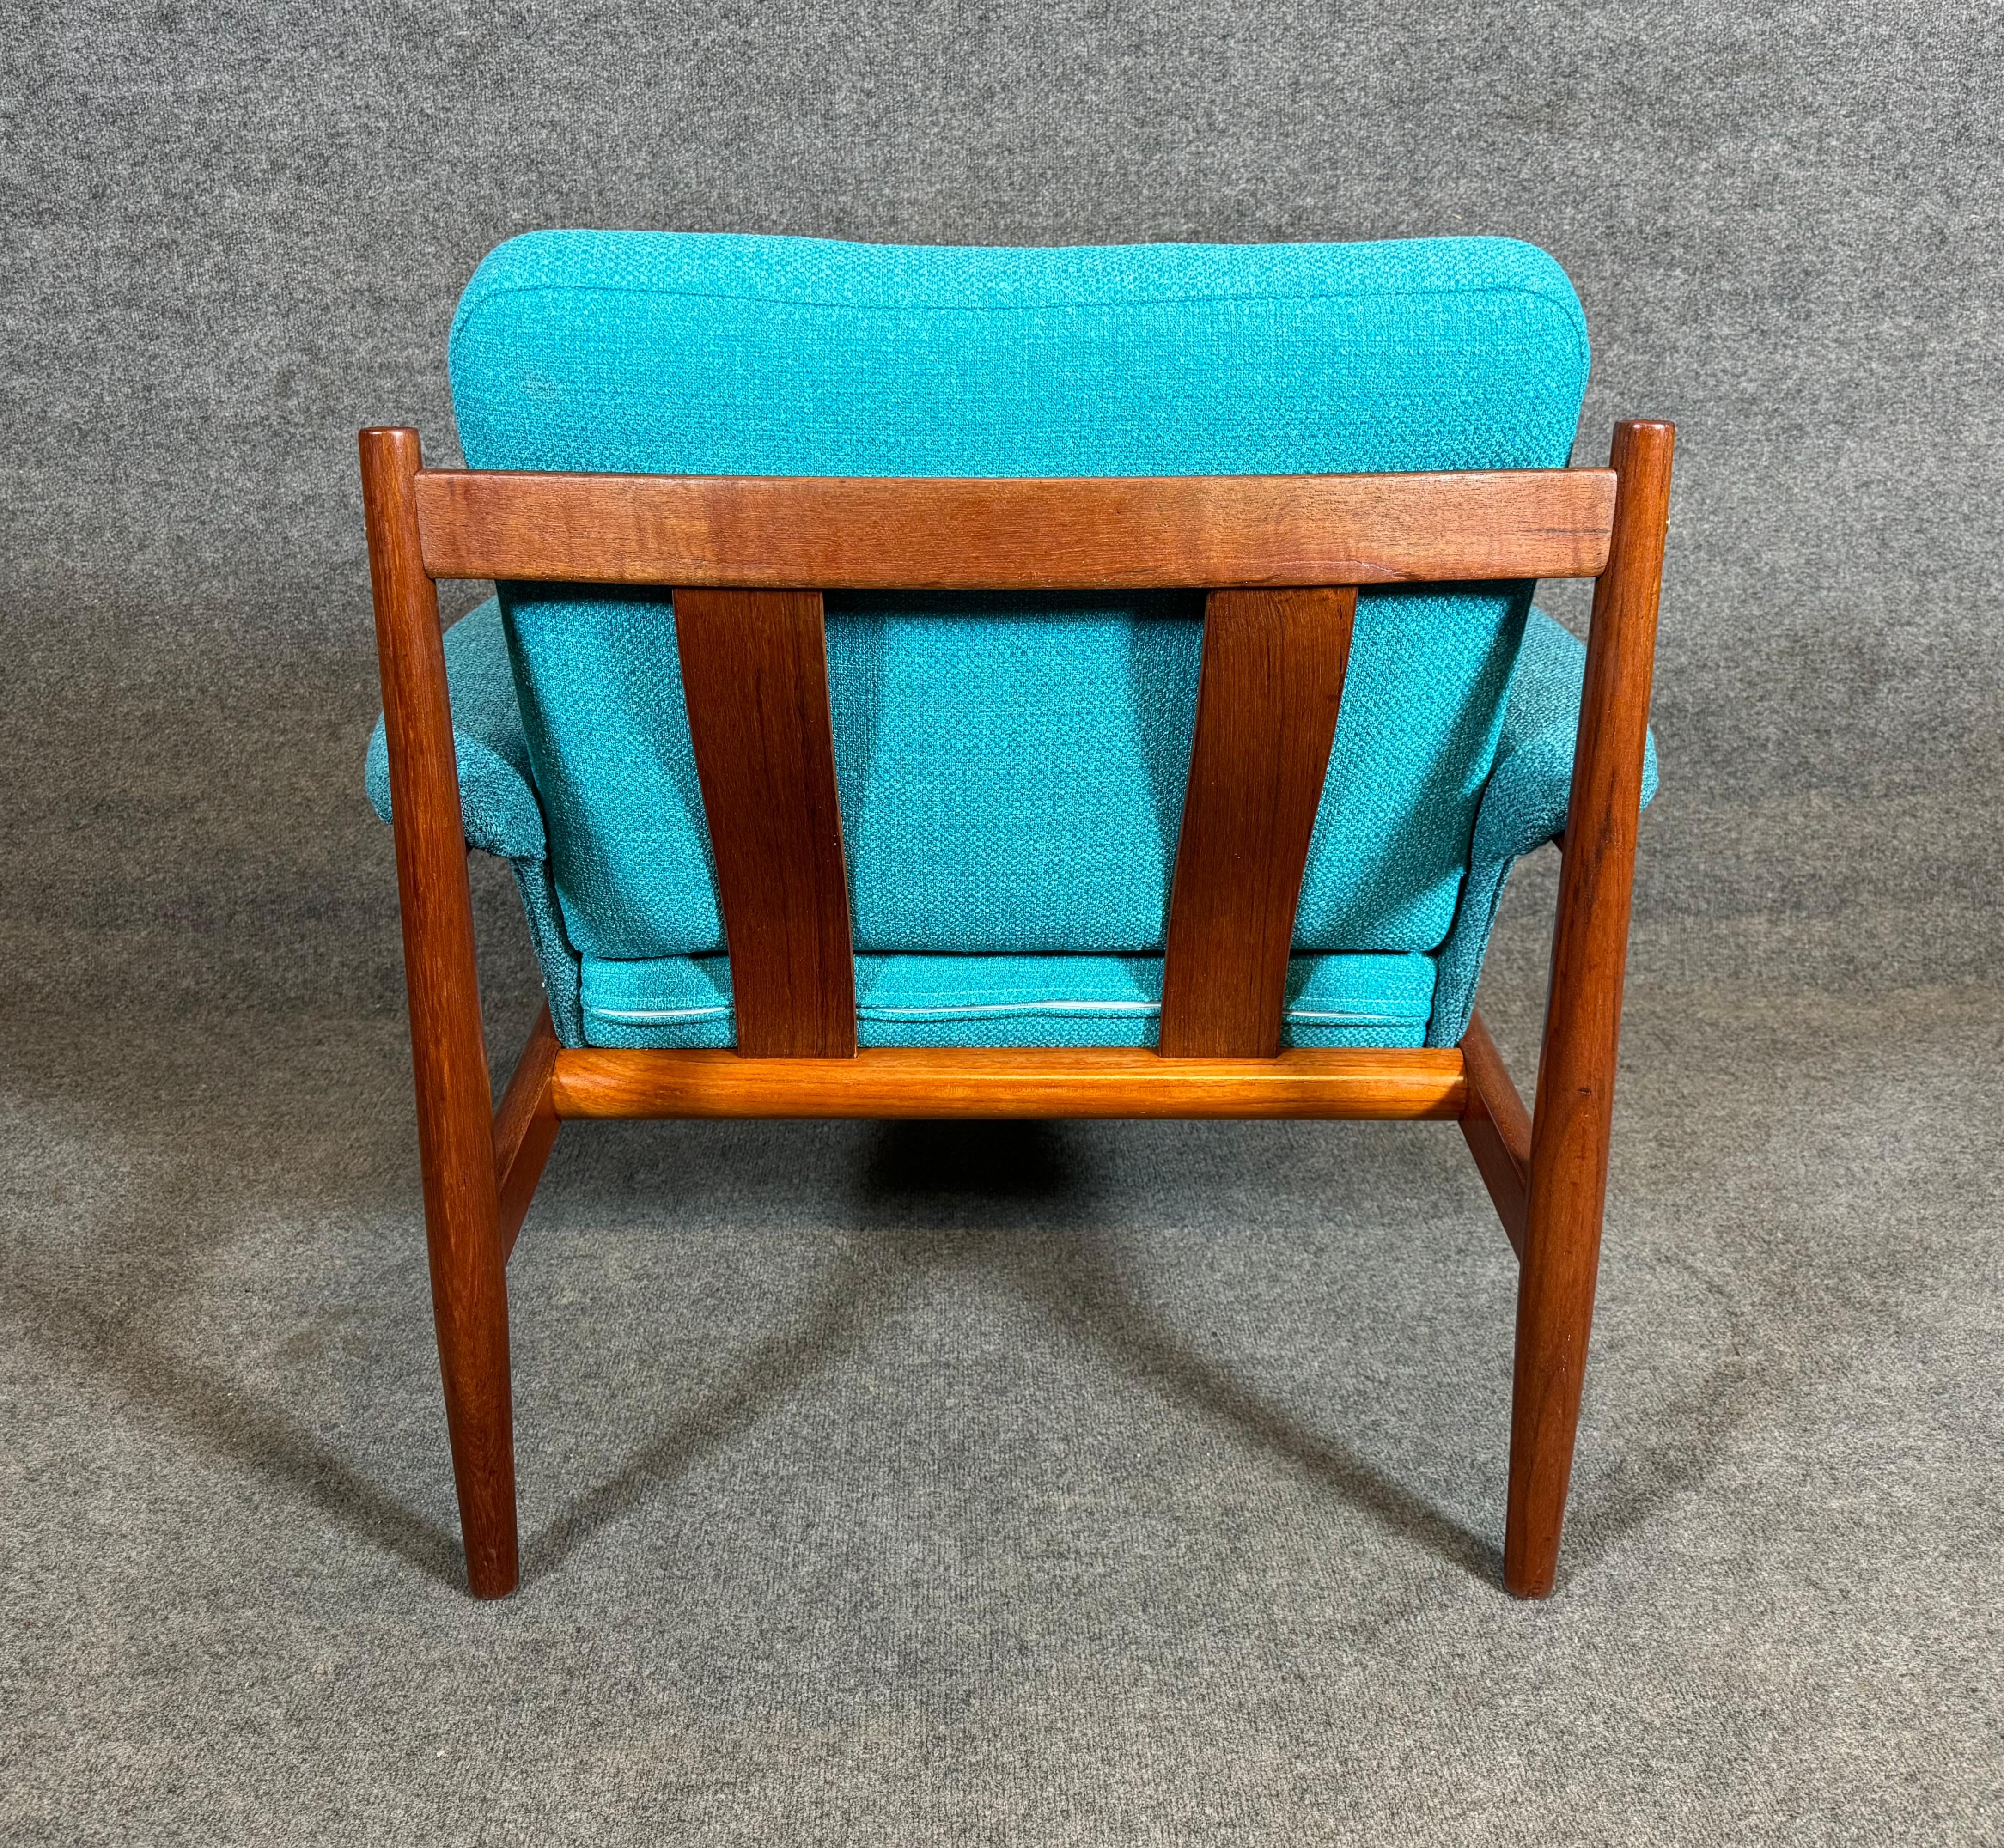 Woodwork Vintage Danish Mid Century Modern Teak Lounge Chair and Ottoman by Grete Jalk For Sale